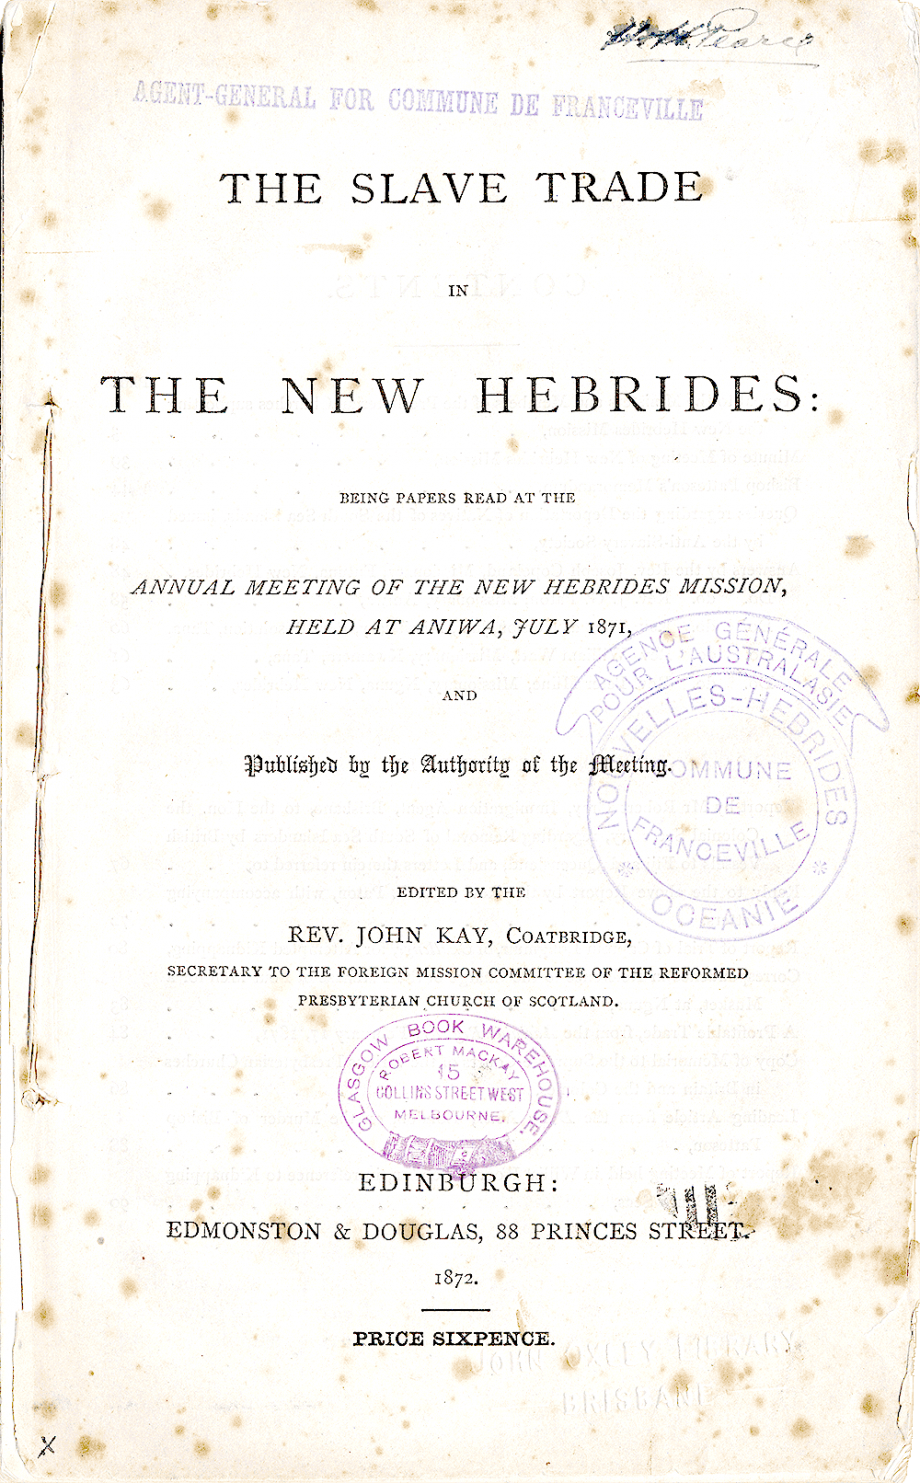 1872 The Slave Trade in the New Hebrides: being papers read at the annual meeting of the New Hebrides Mission, held at Aniwa, July 1871 . John Kay; Reformed Presbyterian Church of Scotland. New Hebrides Mission. Annual meeting (1871 : Aniwa, New Hebrides). Edinburgh : Edmonston & Douglas :1872. Catalogue record; Digital copy